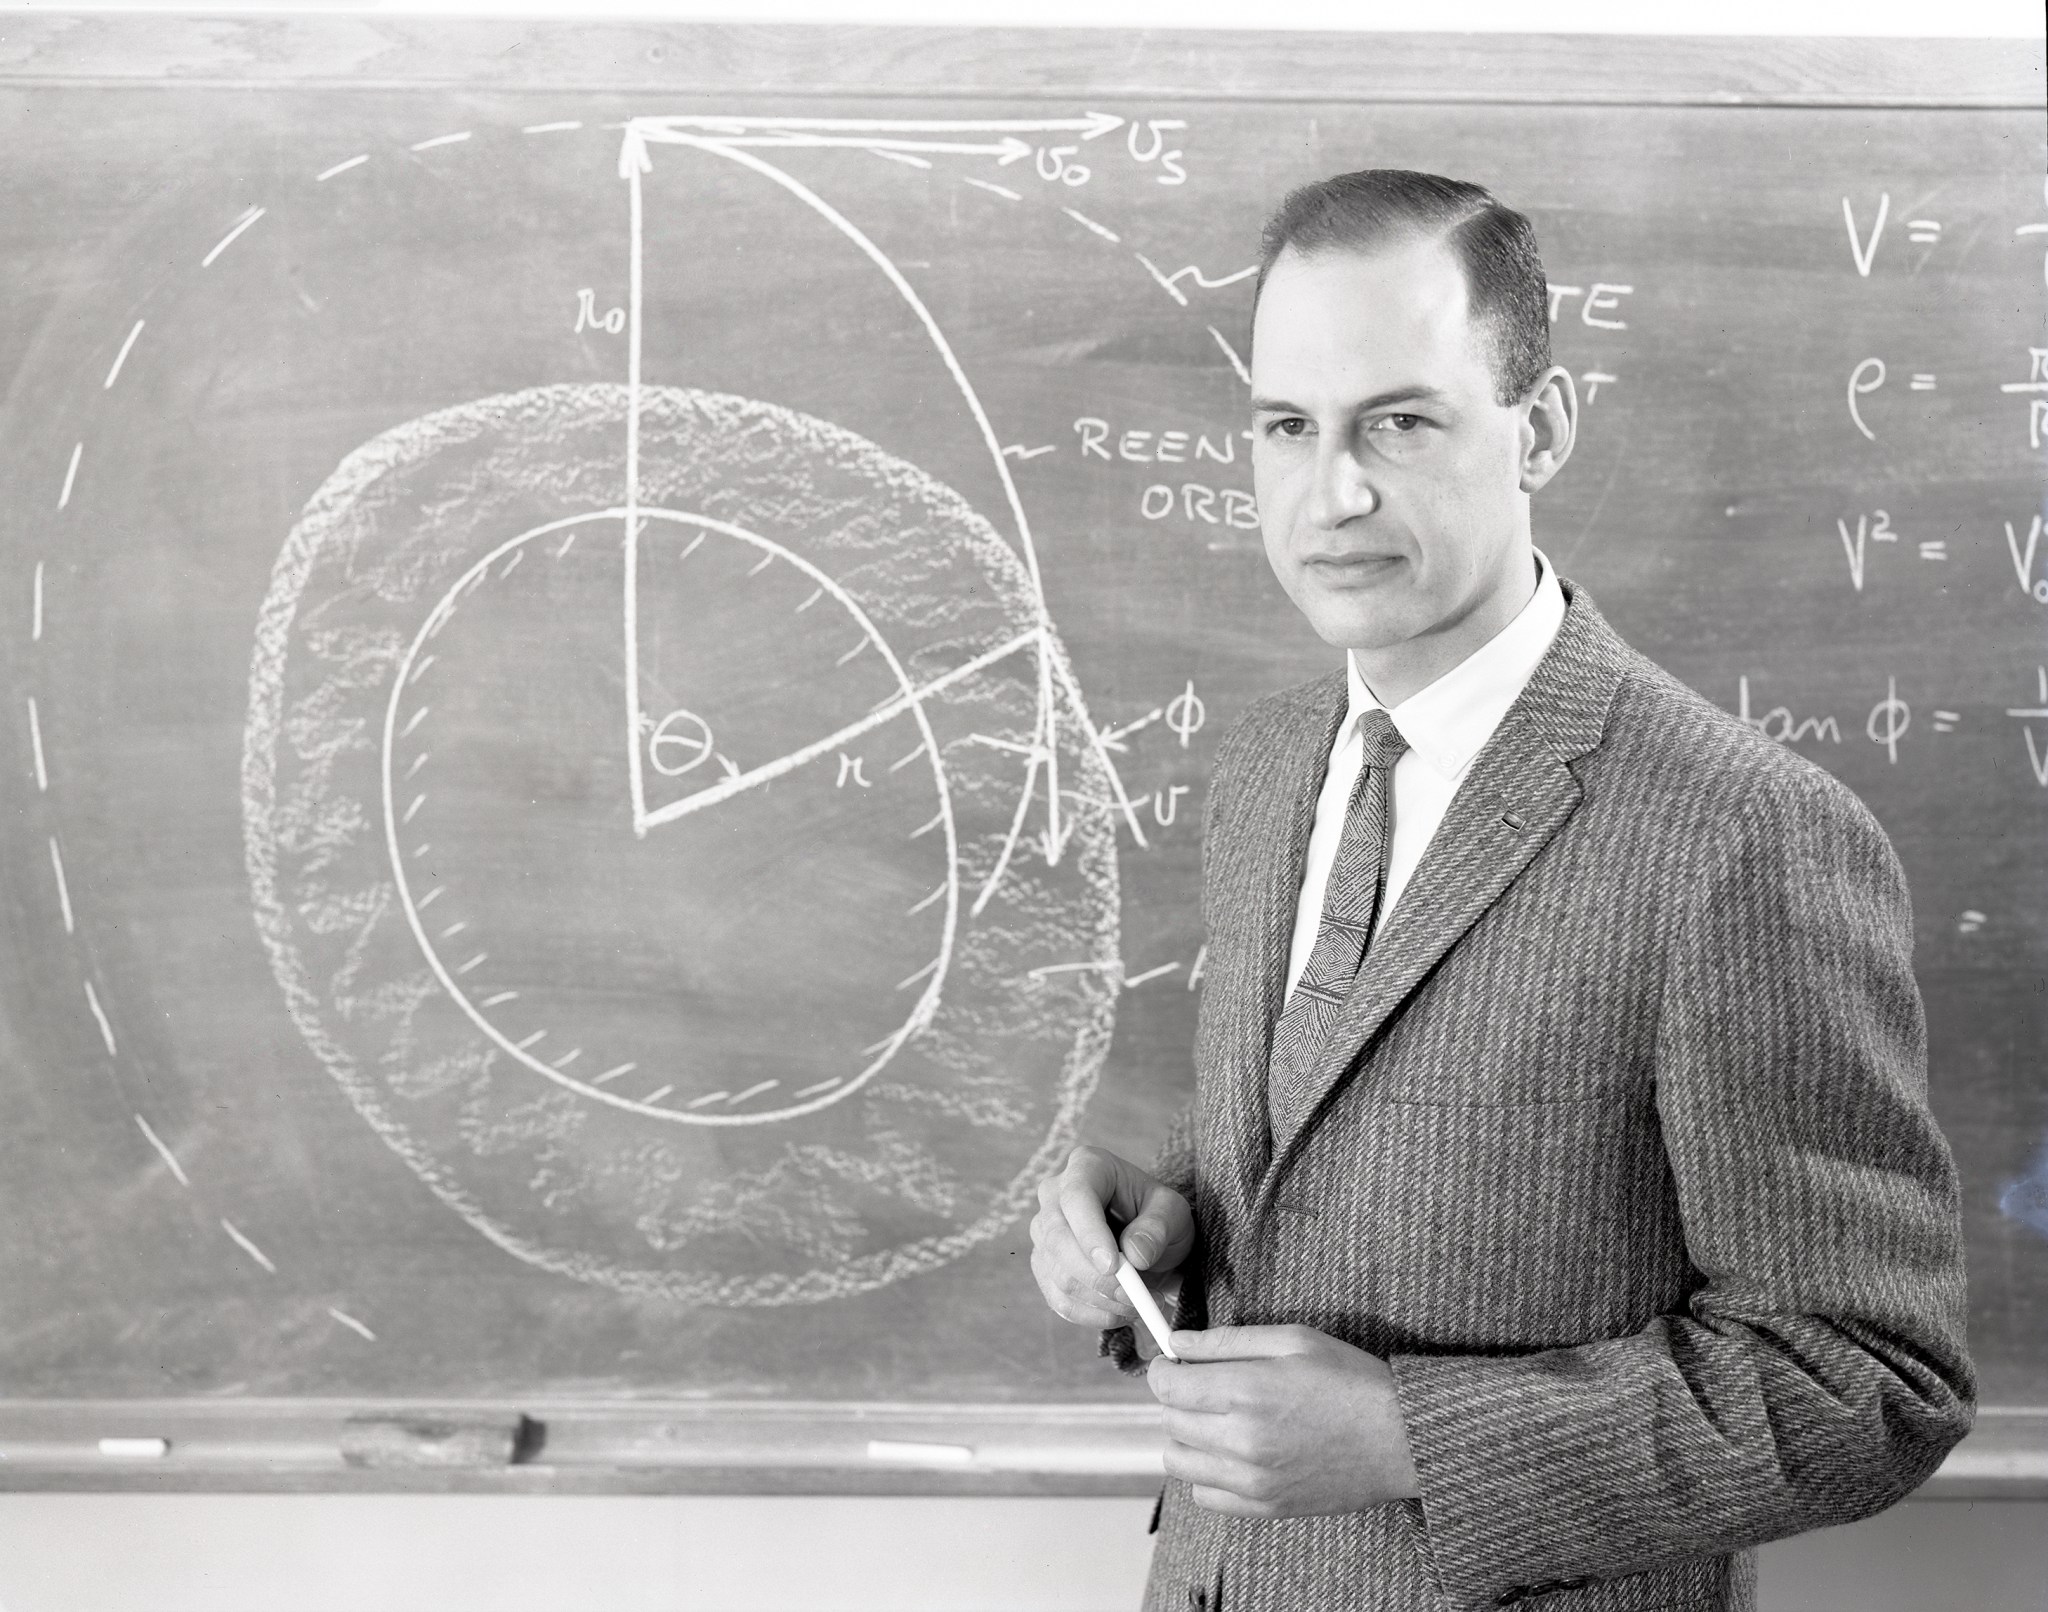 George Low in front of blackboard with calculations.